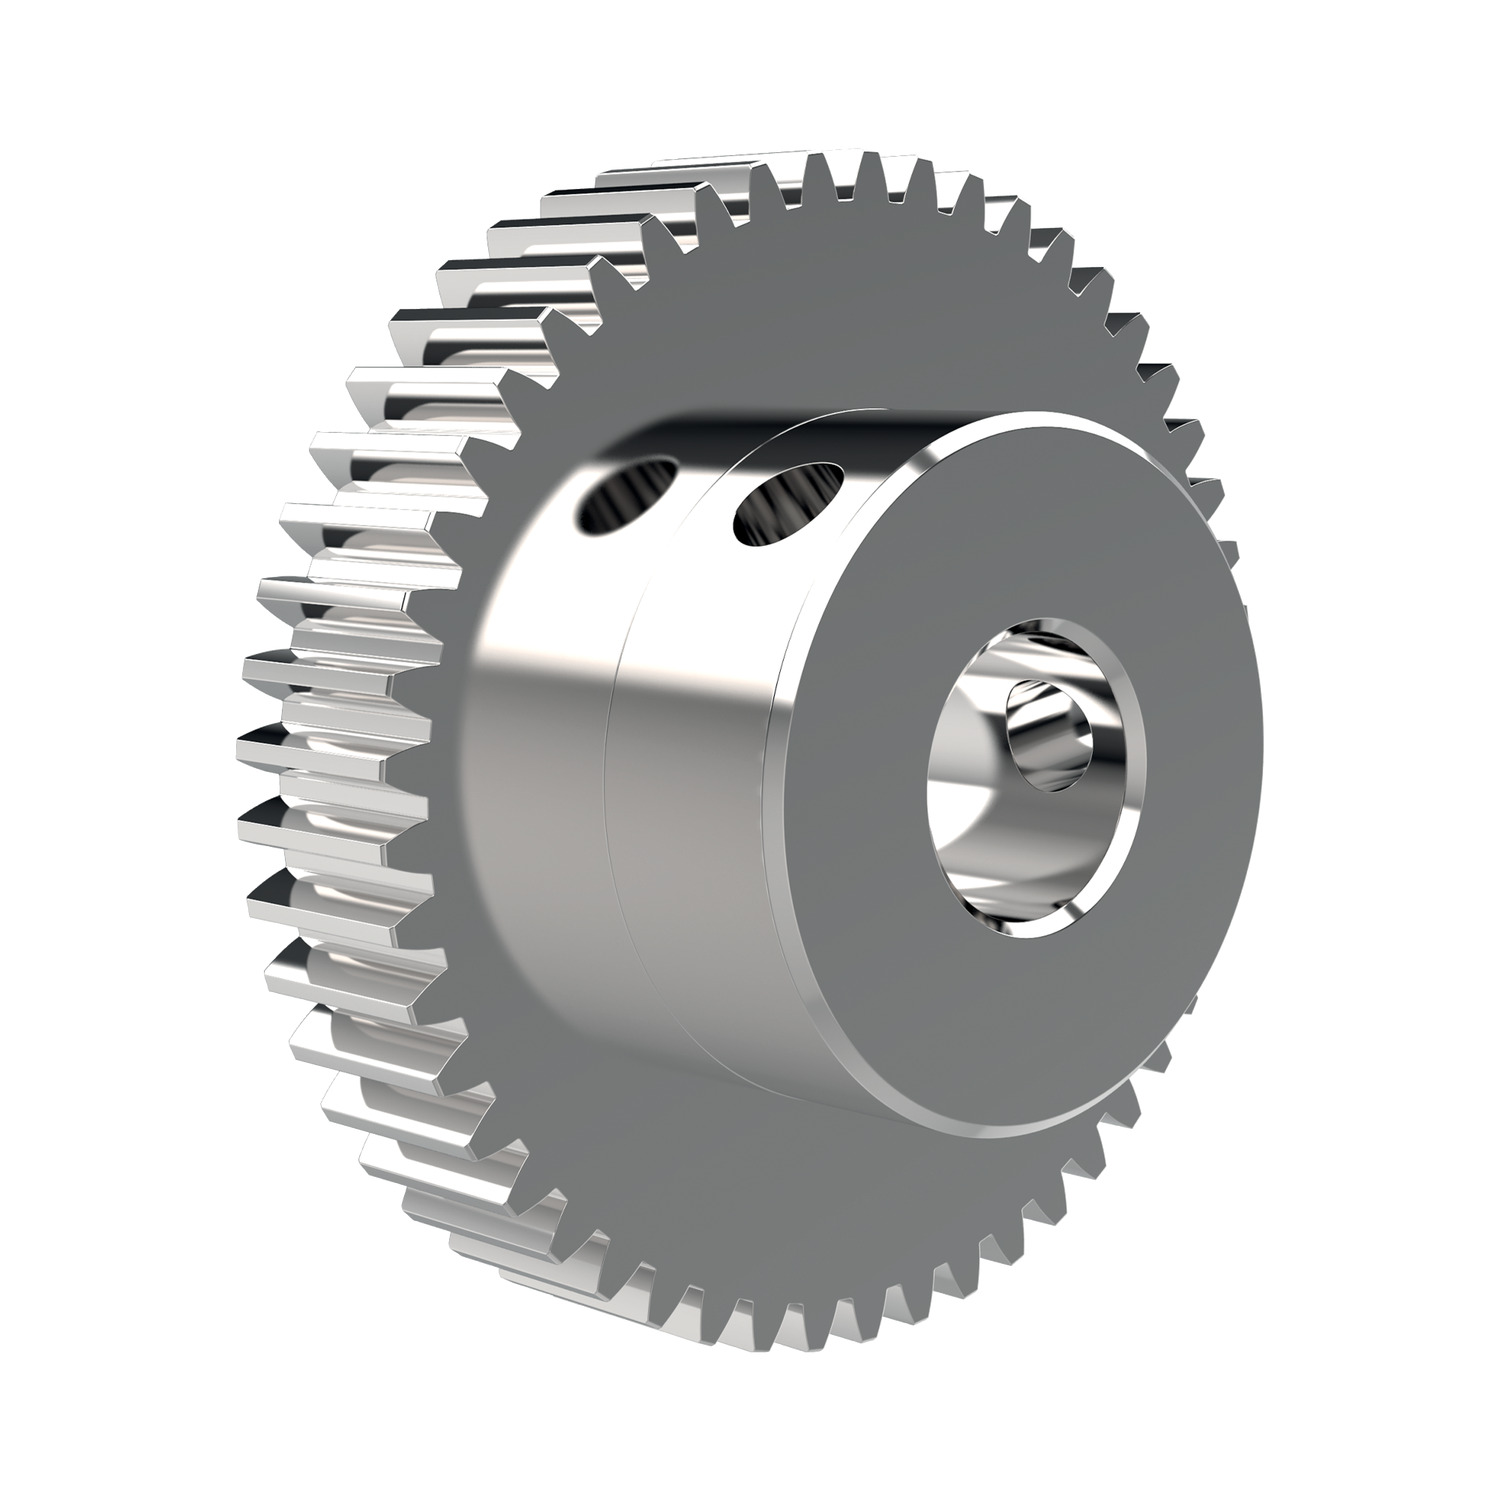 Spur Gears - Module 1 This is a typical module 1 Spur Gear. This product comes with 14-120 teeth and the CAD model shows an example with two threads for set screws.